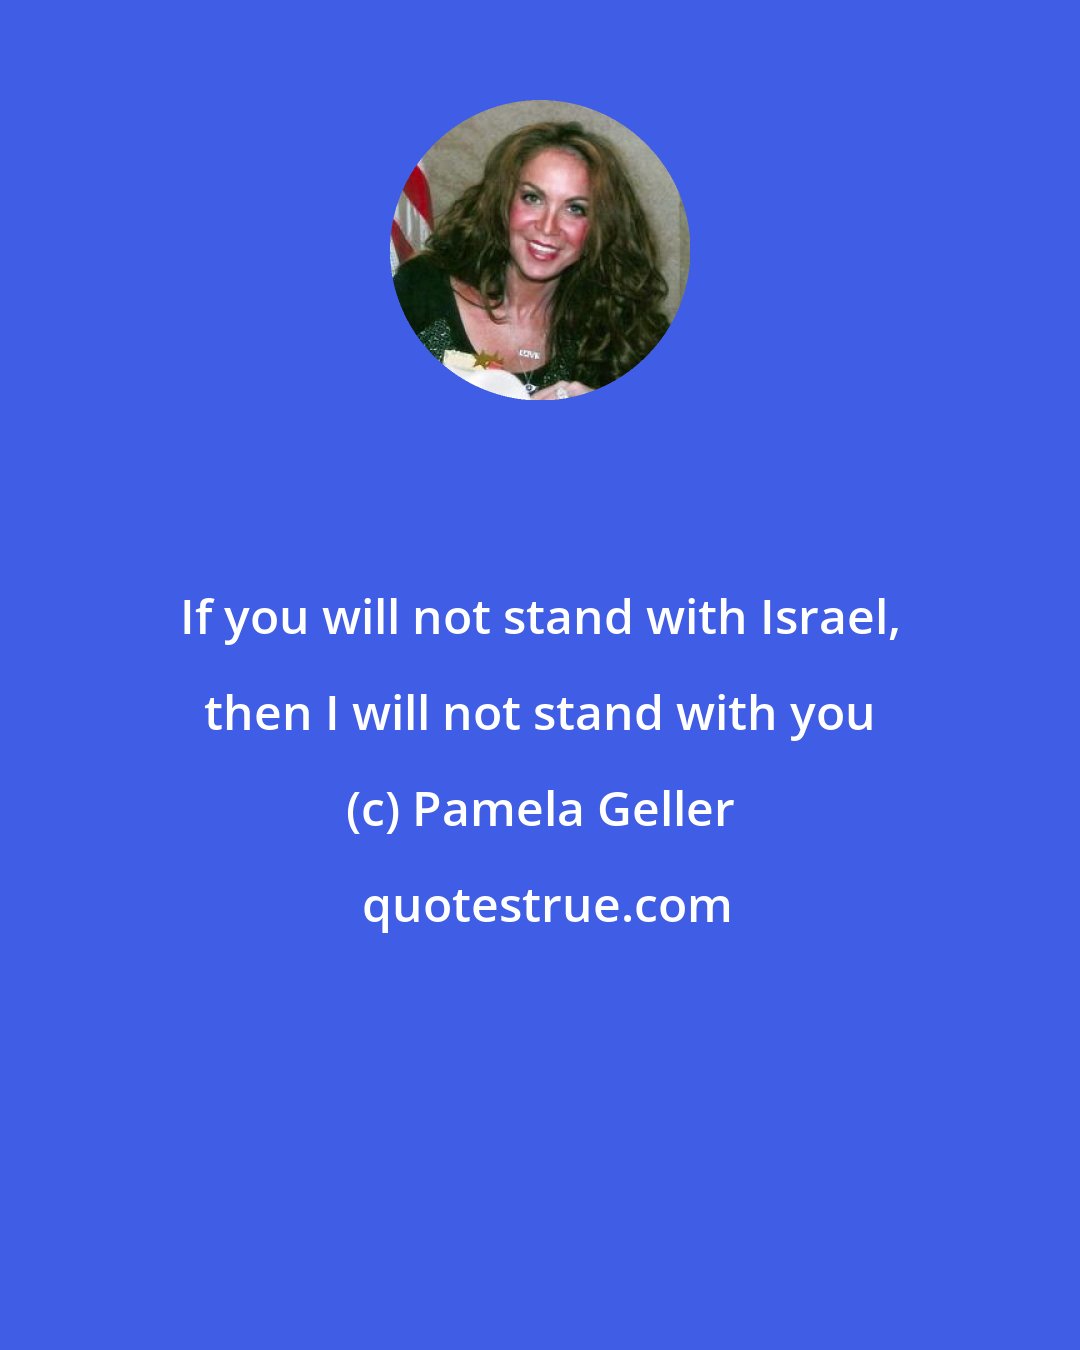 Pamela Geller: If you will not stand with Israel, then I will not stand with you